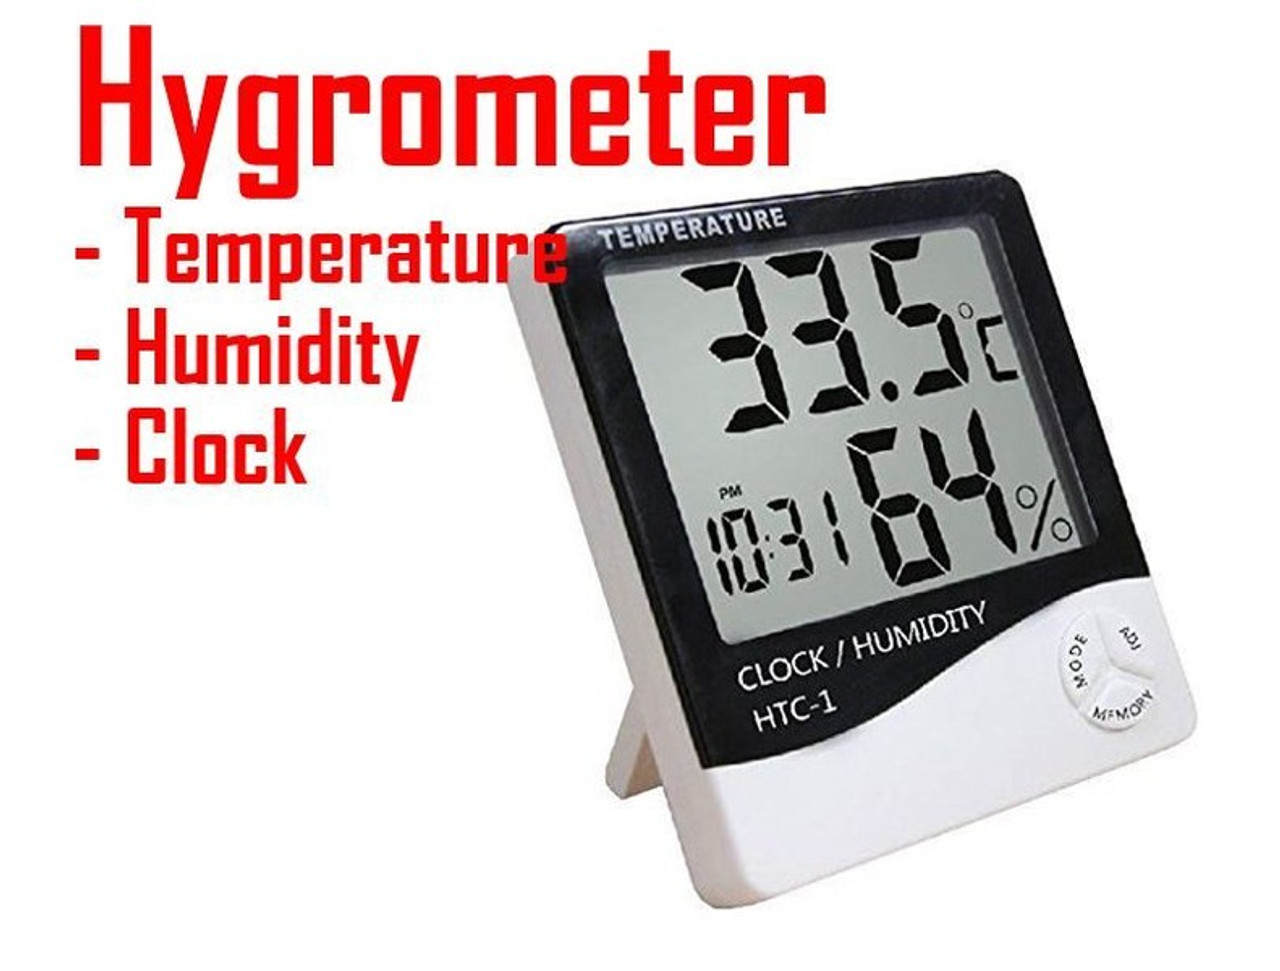 HTC-8A Digital Luminous Electronic Thermo-hygrometer Thermometer  Temperature Humidity Tester With LCD Backlight & Clock - Buy HTC-8A Digital  Luminous Electronic Thermo-hygrometer Thermometer Temperature Humidity  Tester With LCD Backlight & Clock Product on